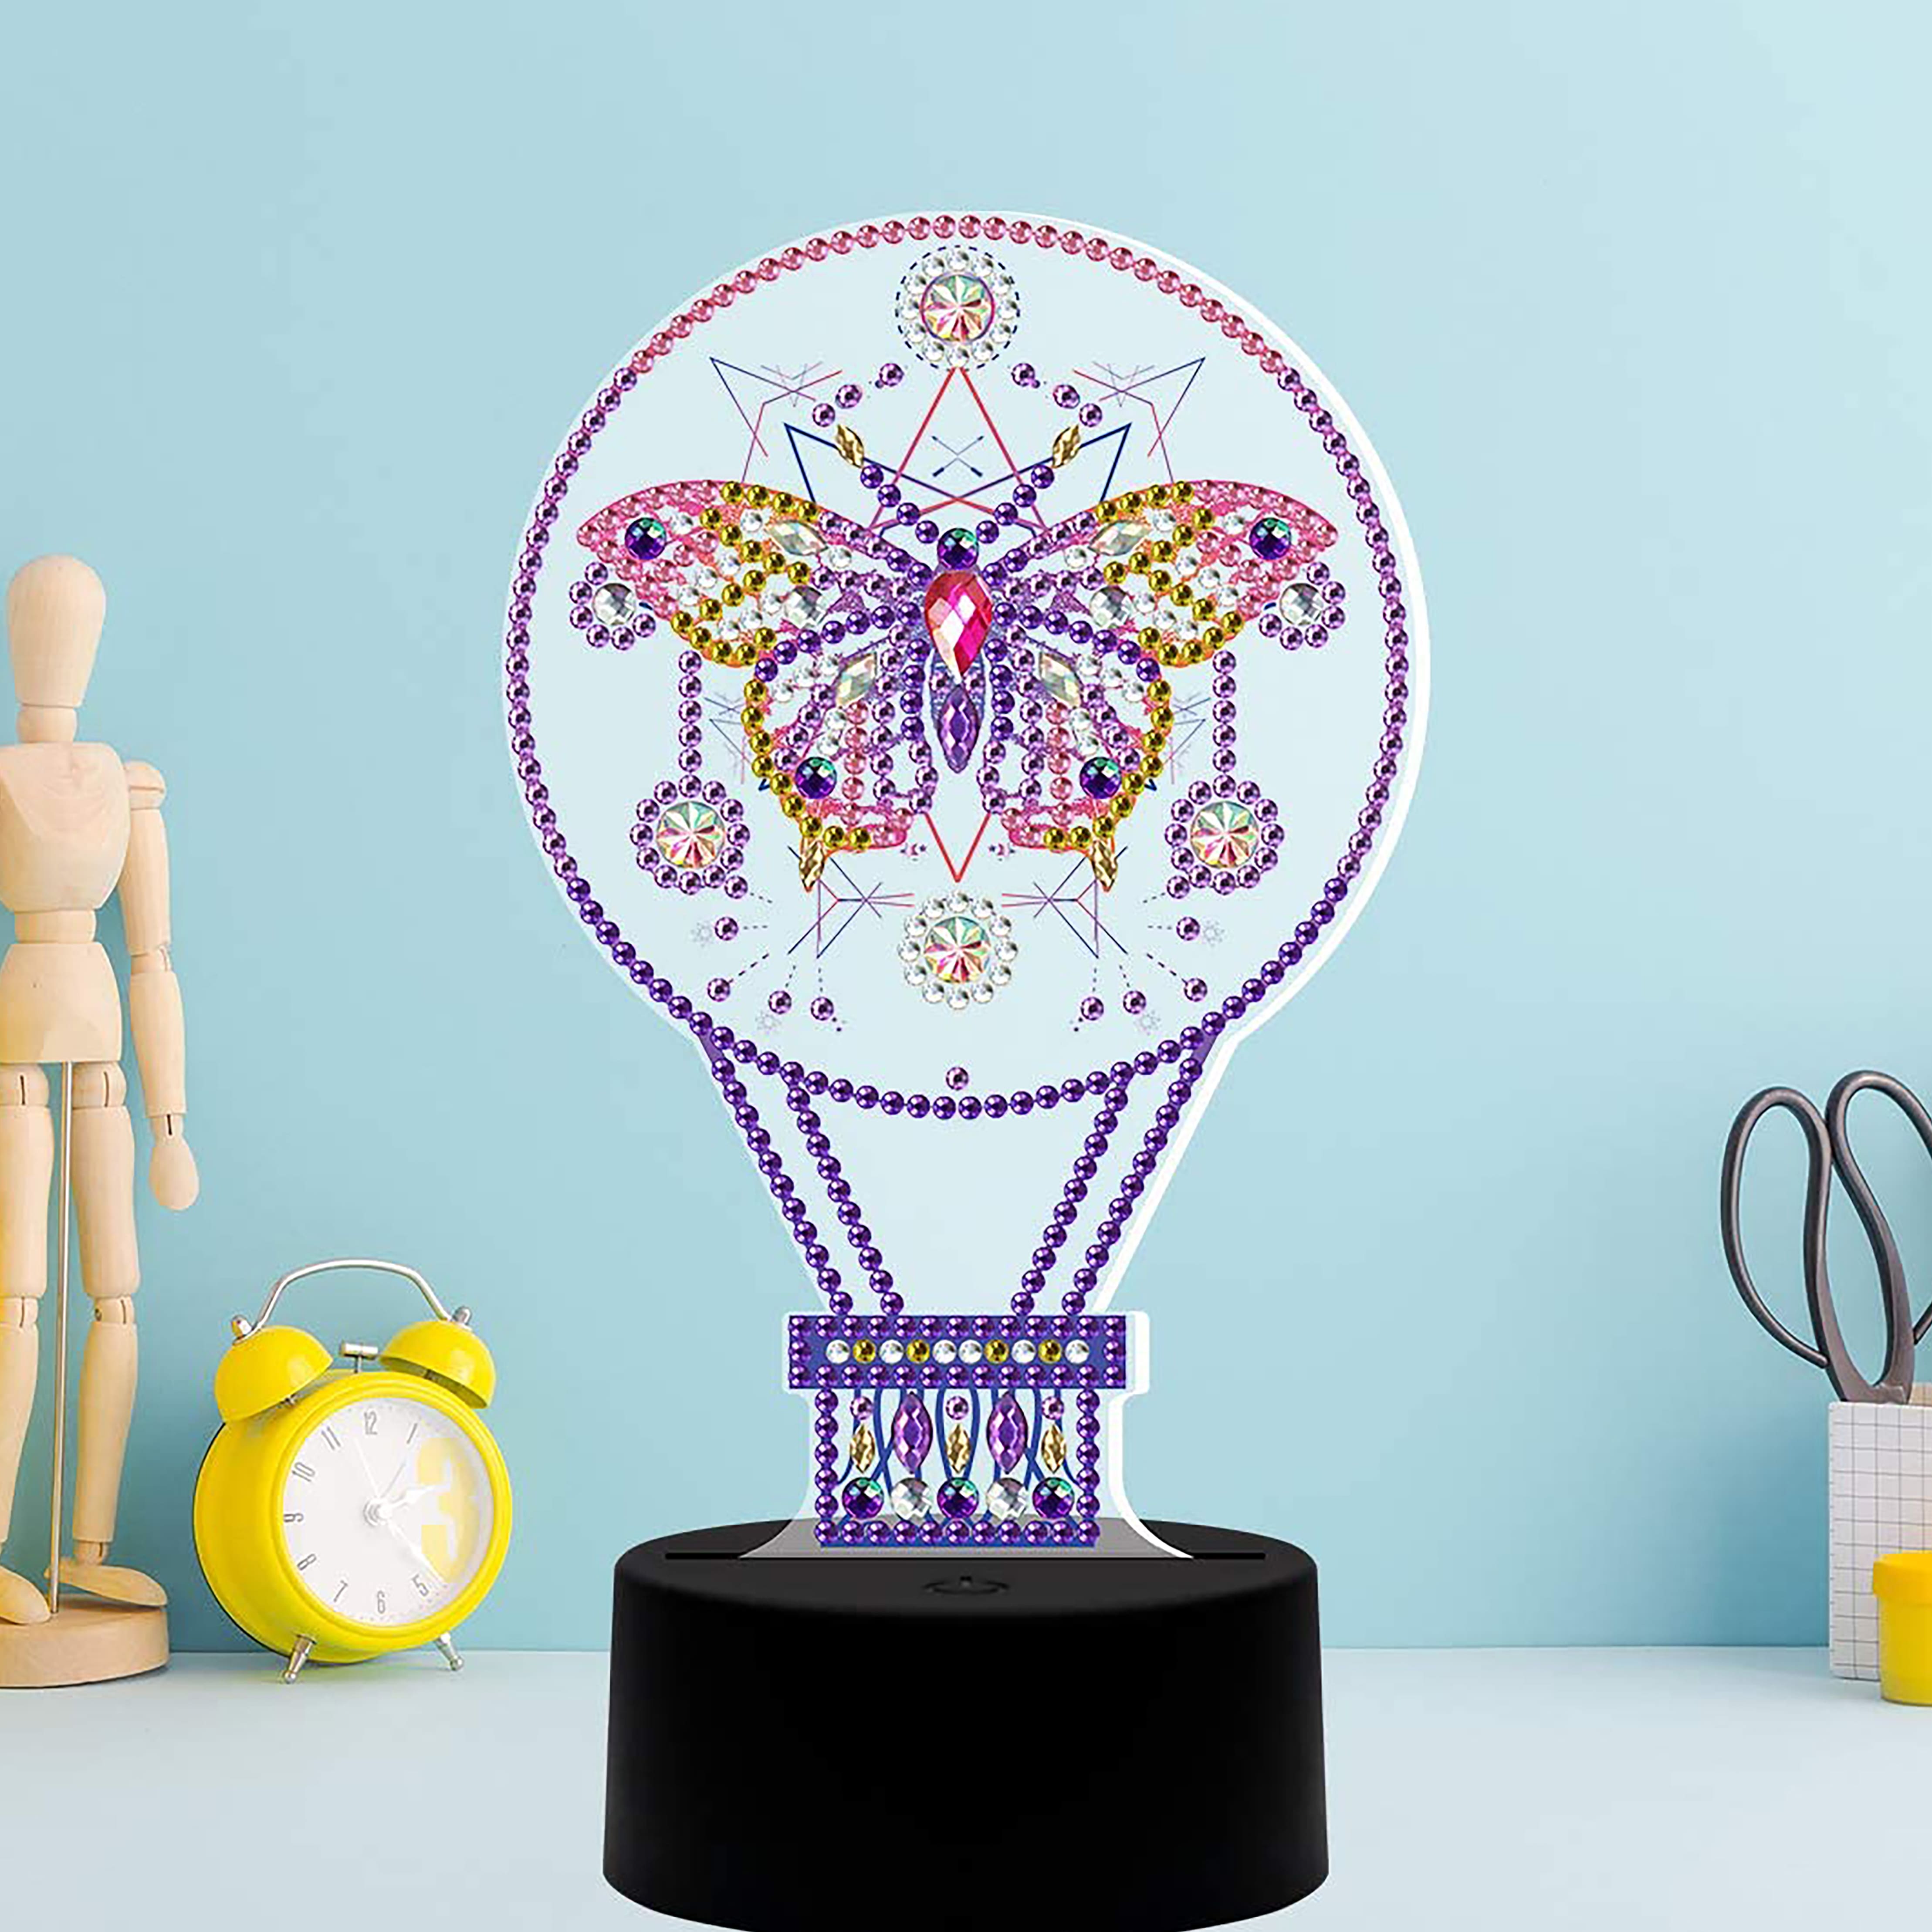 Sparkly Selections Butterfly Lamp Diamond Art Kit